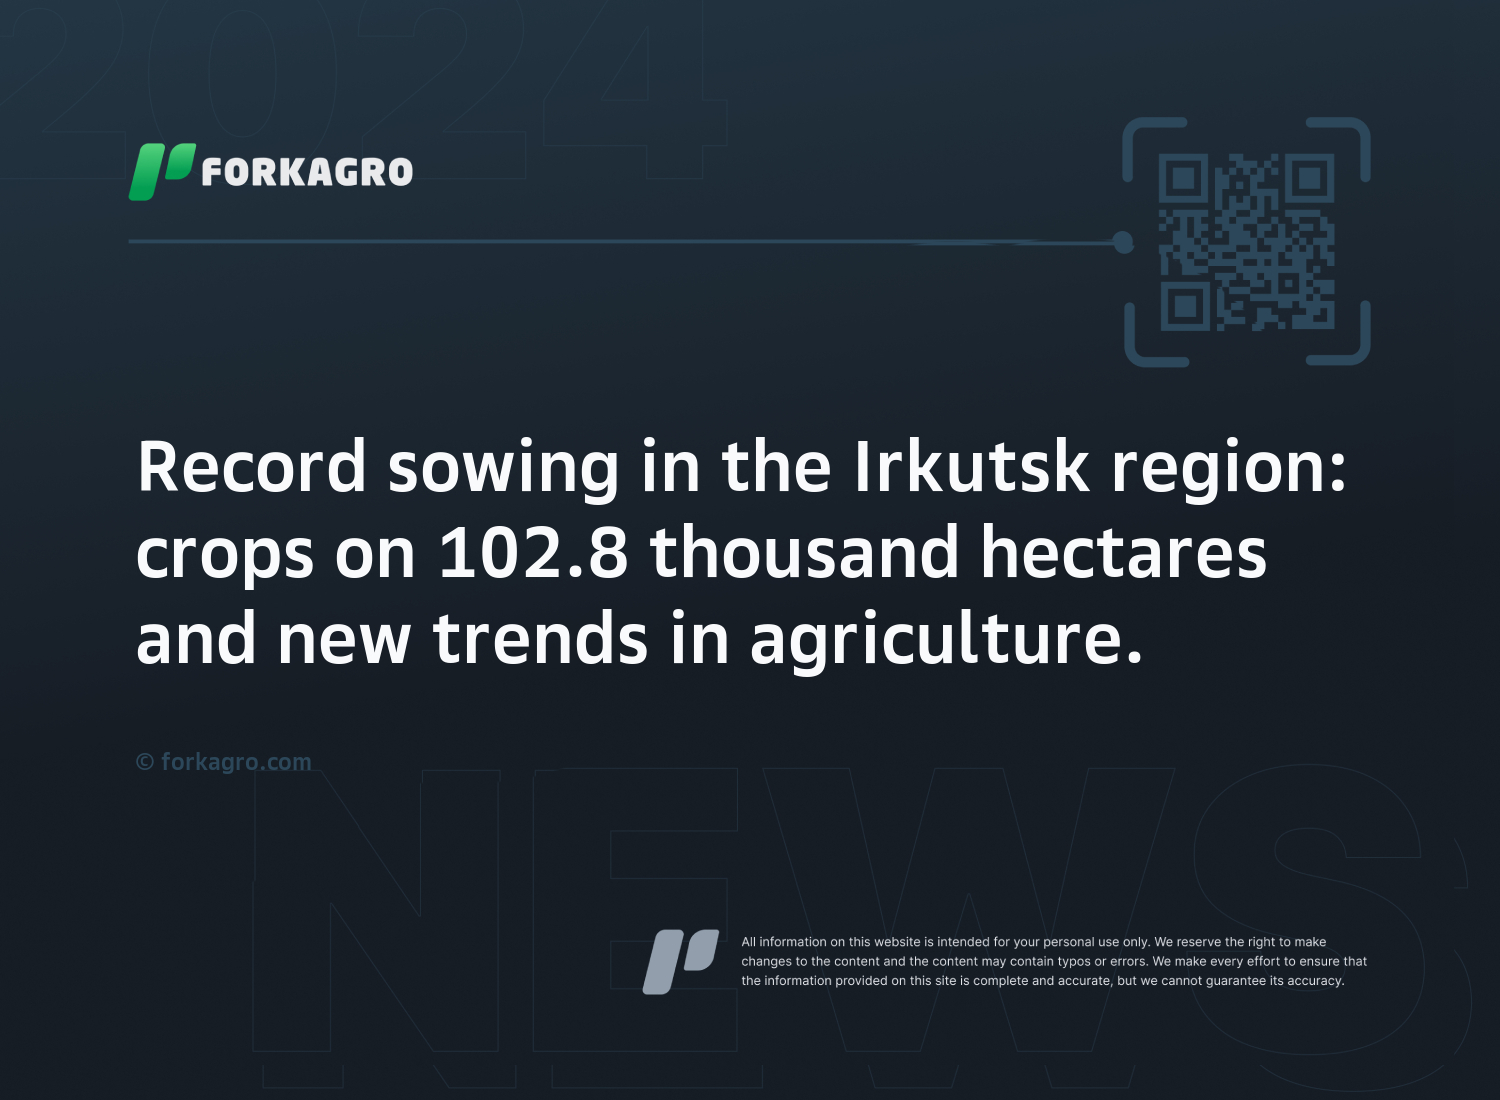 Record sowing in the Irkutsk region: crops on 102.8 thousand hectares and new trends in agriculture.